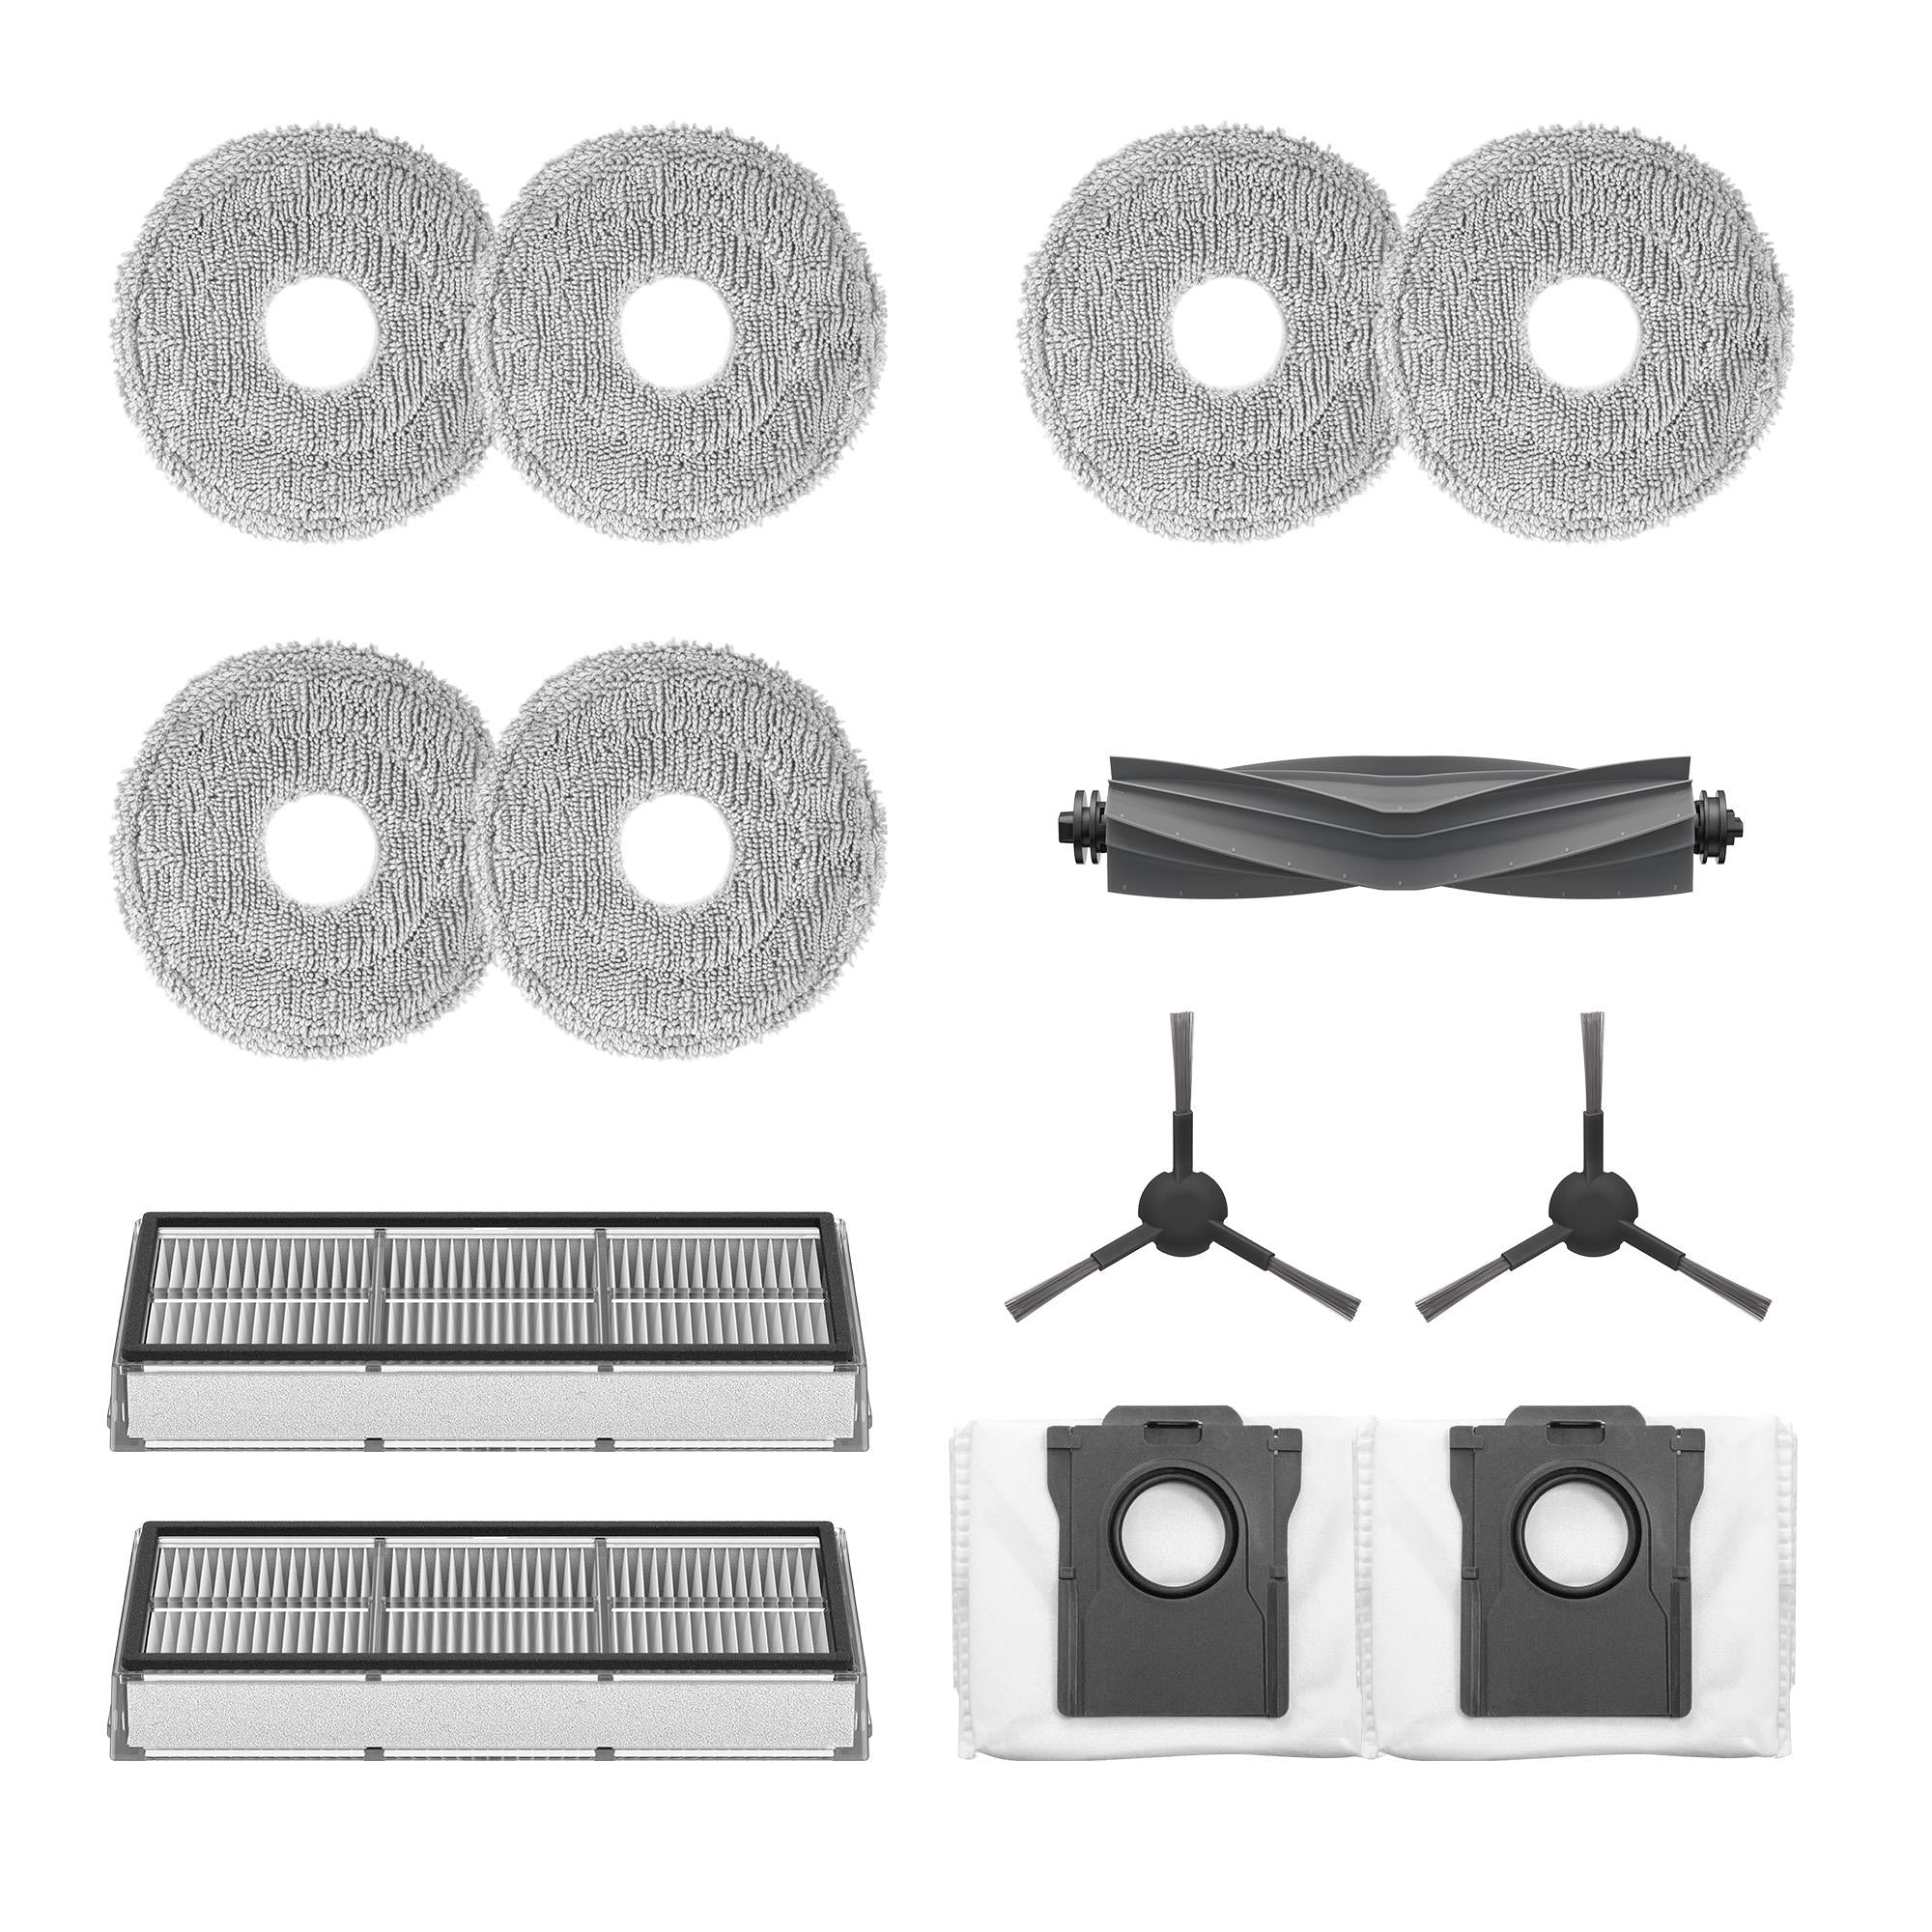 dreame accessories kit for l10s pro ultra